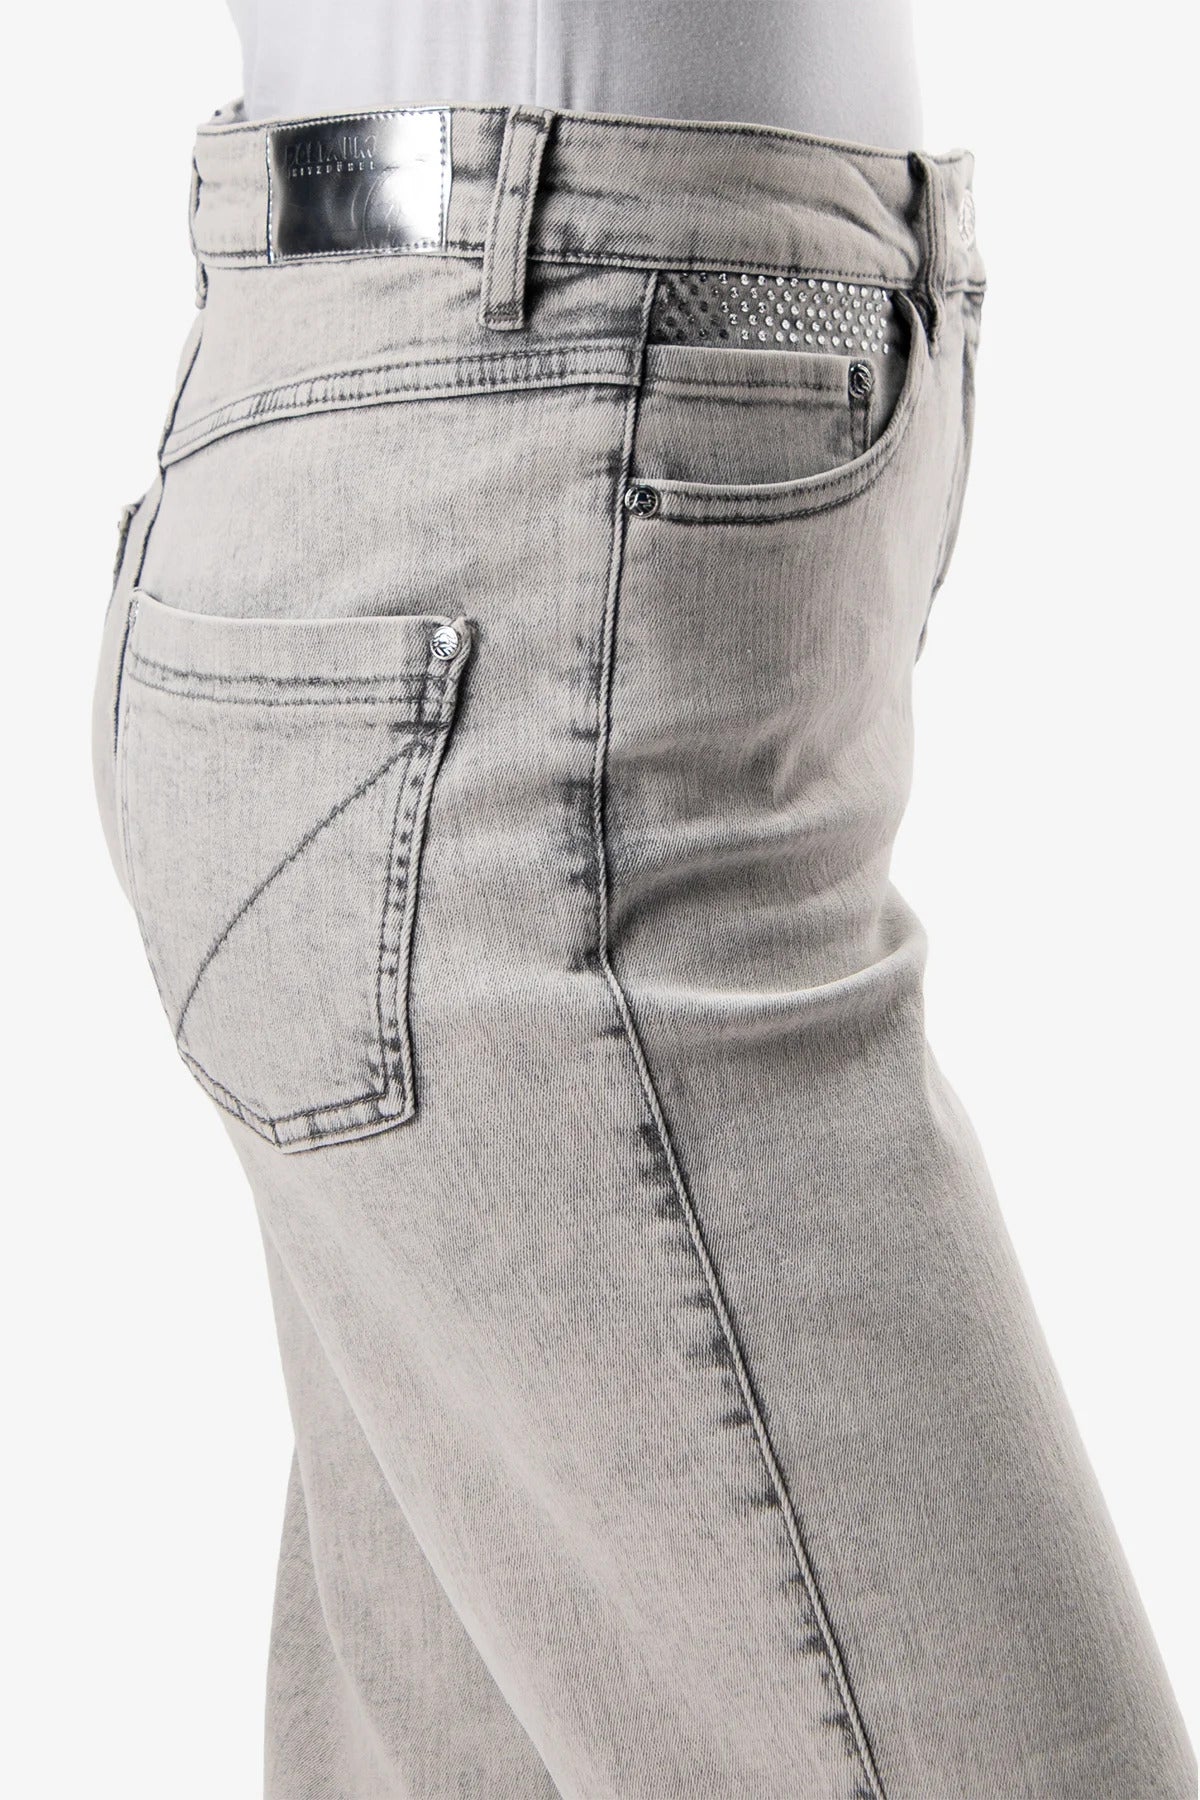 Jeans with Metal Stones